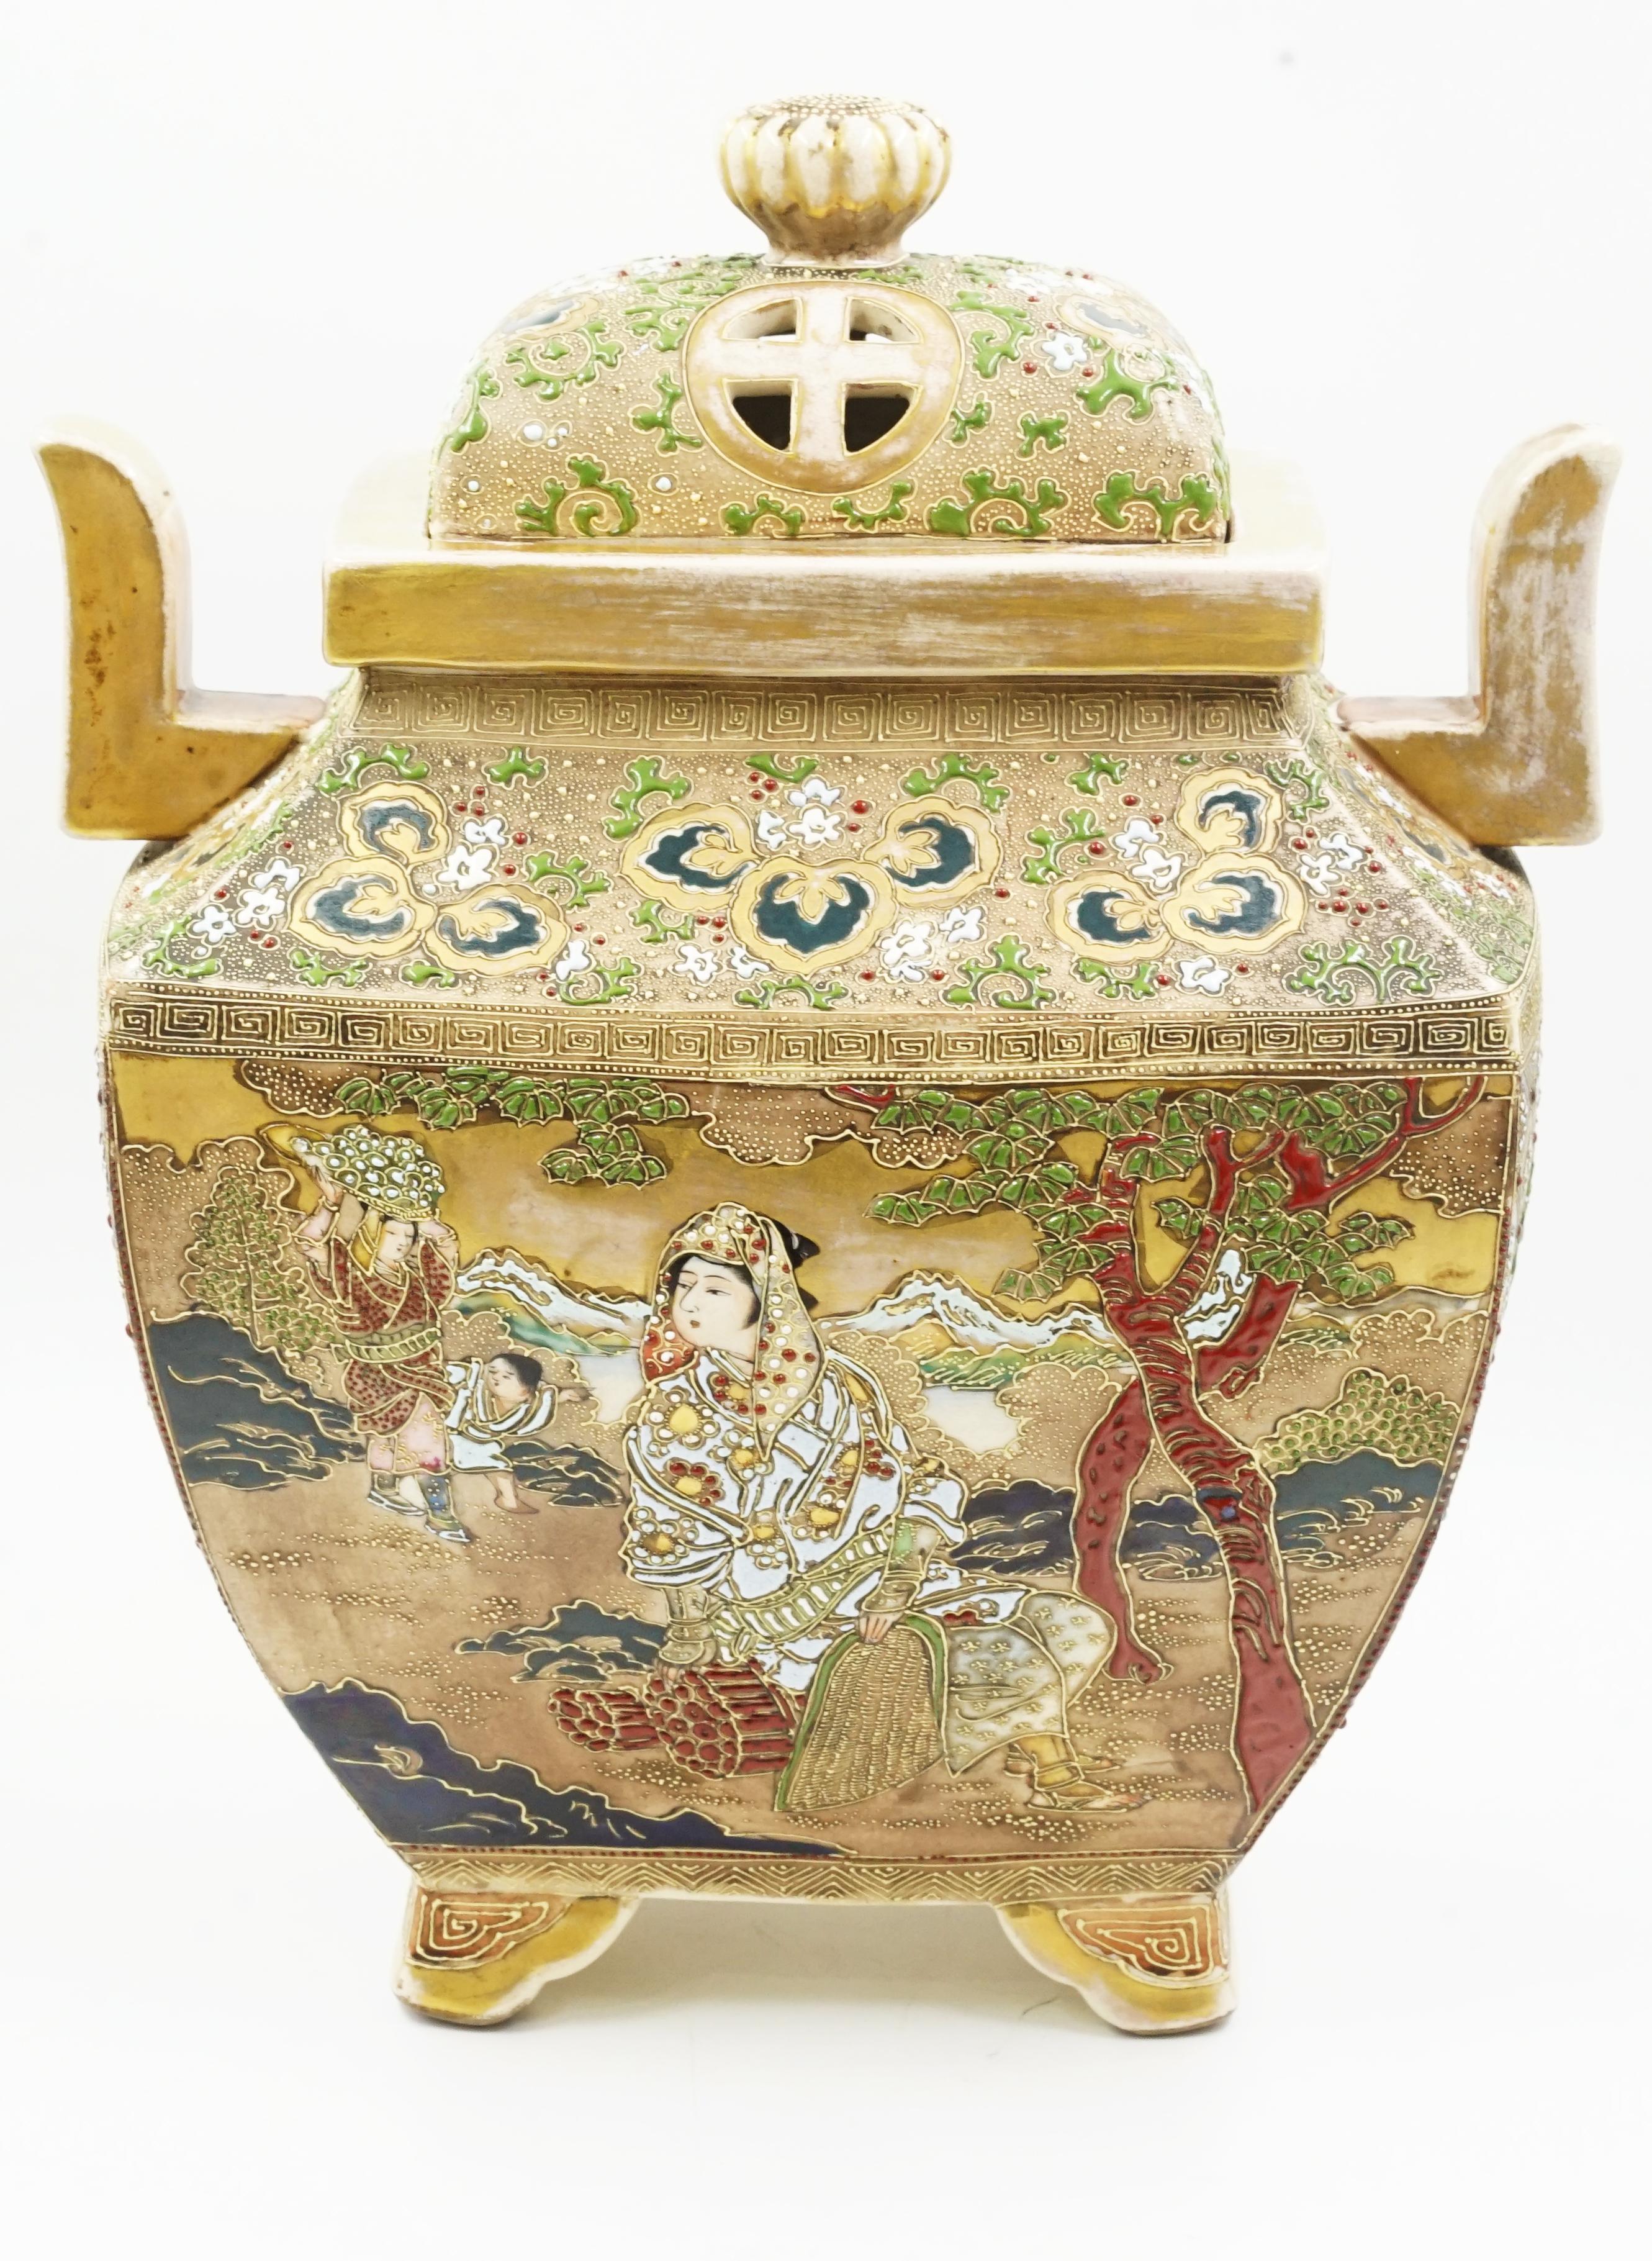 Koro Satsuma Japanese ceramic
Japanese glazed ceramic in various colors
Meiji Style Circa 1940 Origin Japan
It has traditional images painted on its front and back.
The purpose of this ceramic was to burn incense.
It is in excellent condition
,